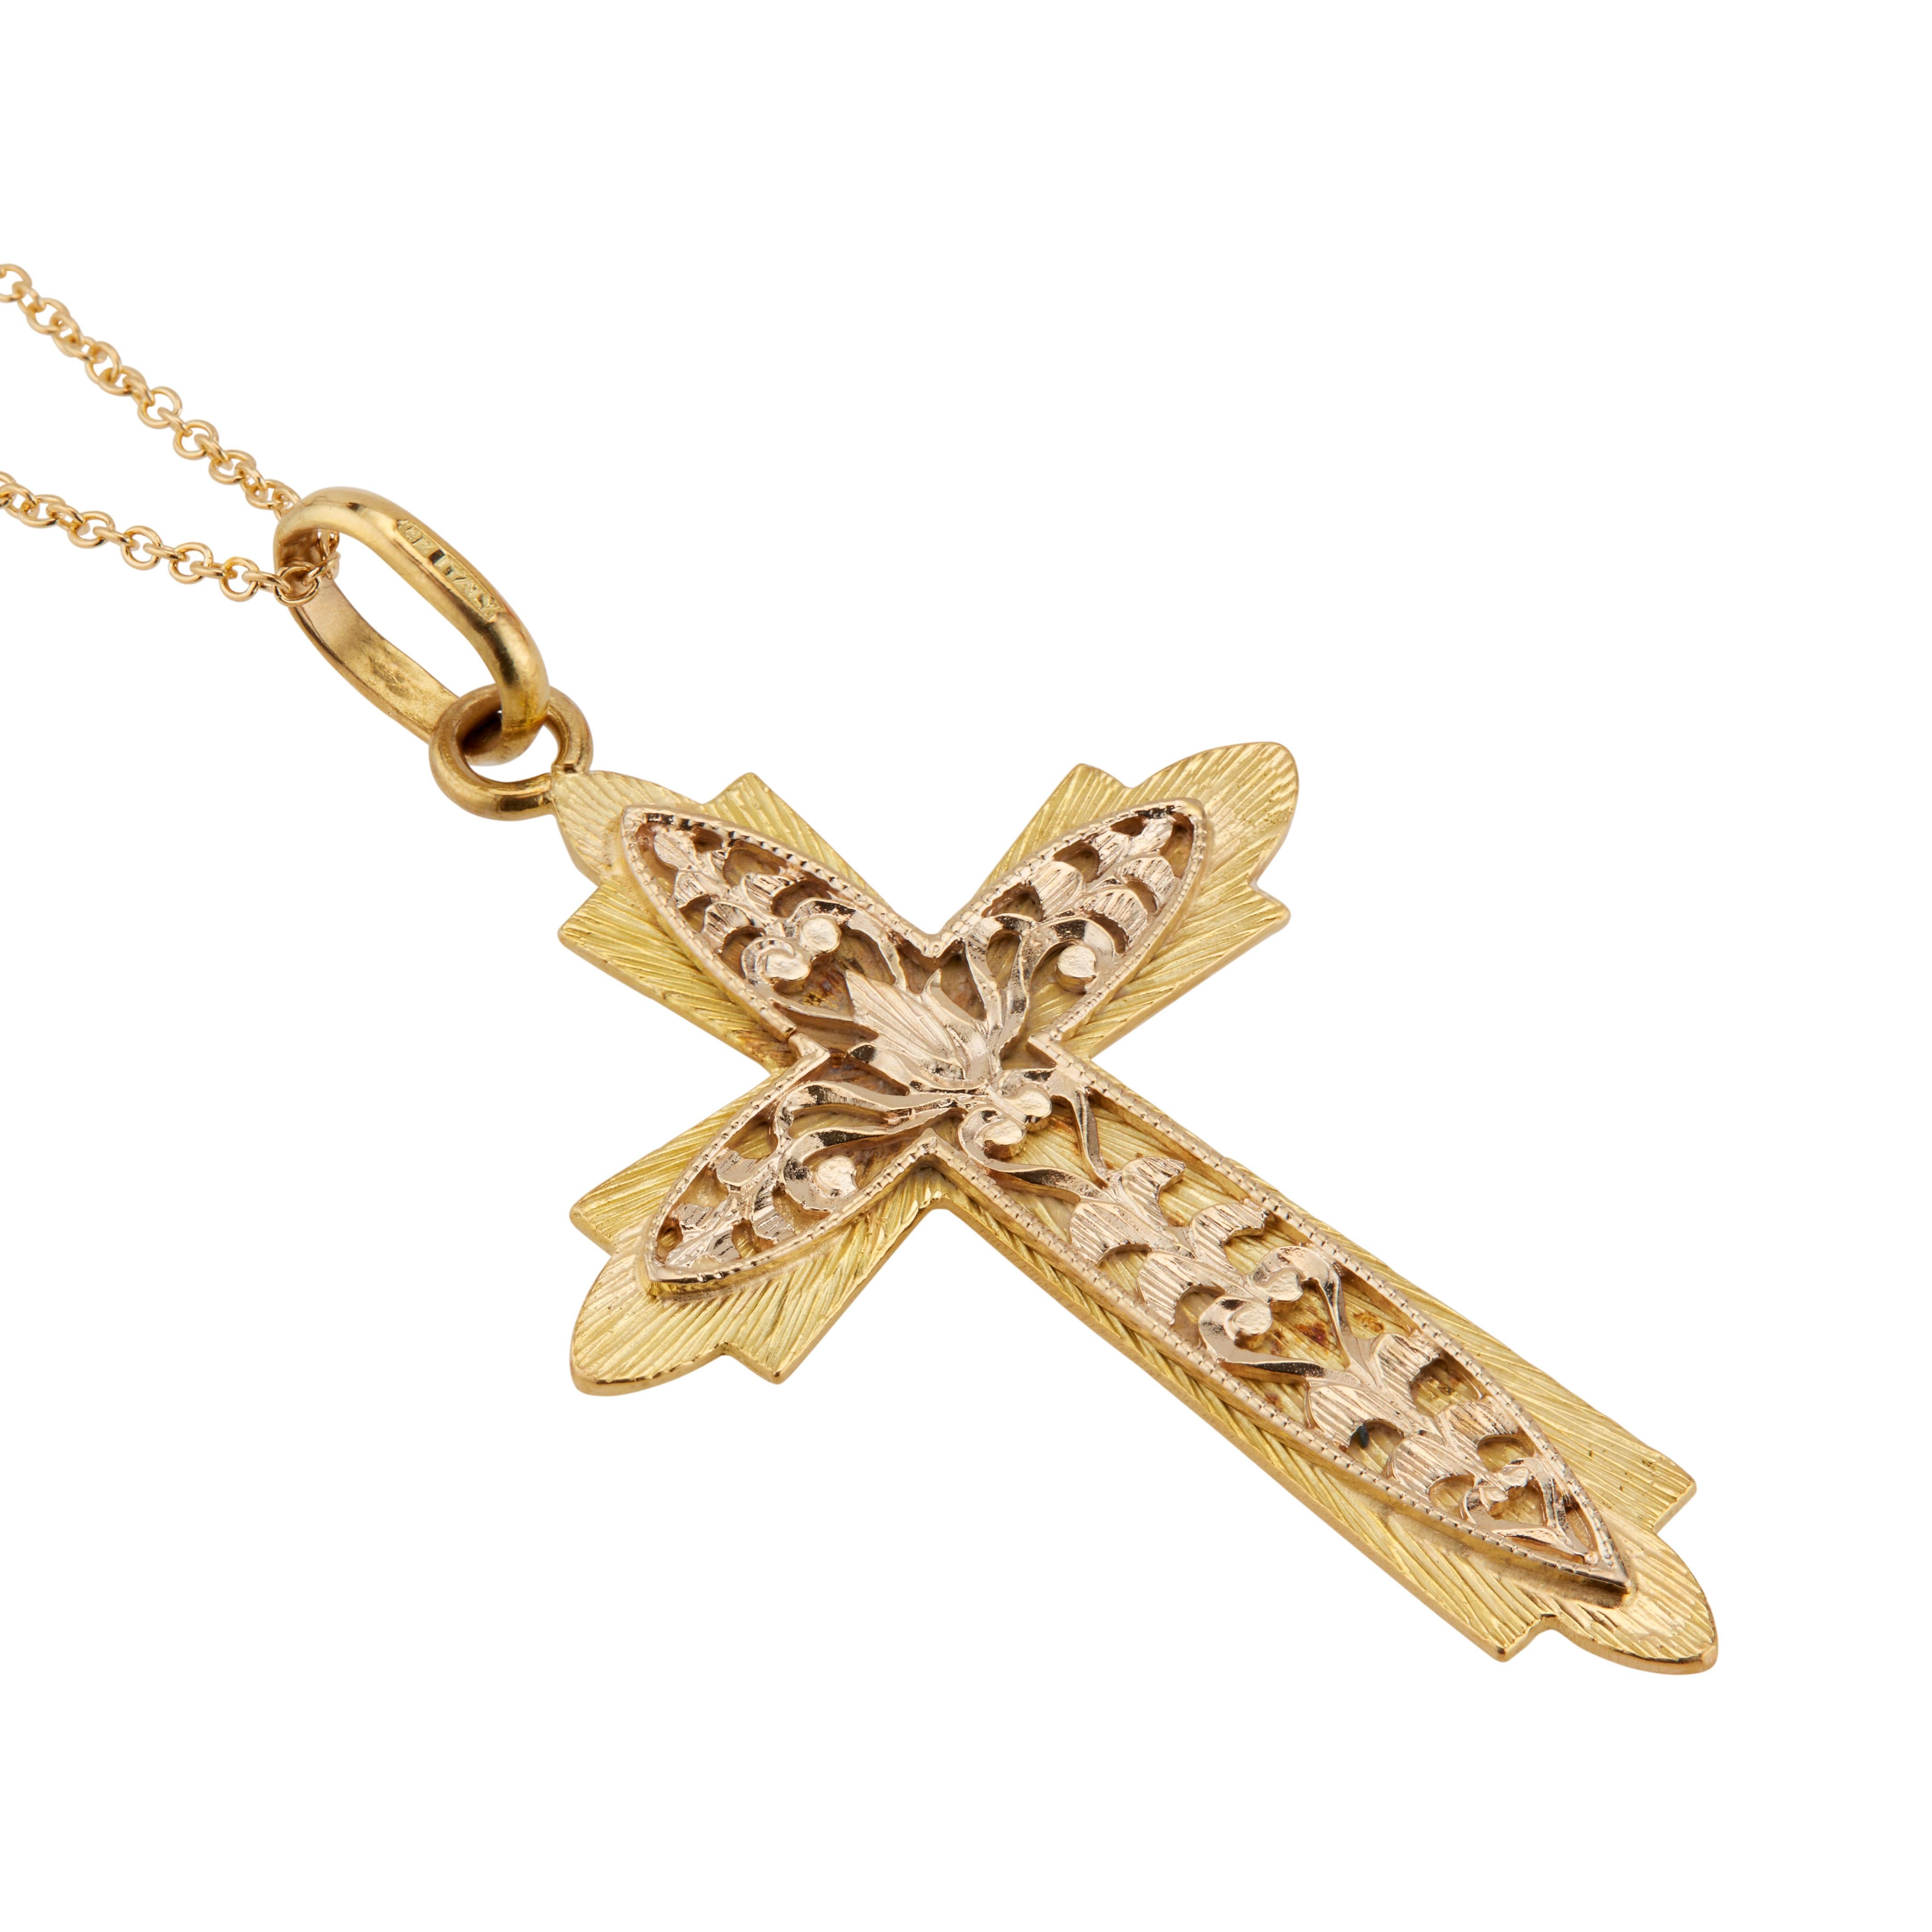 1960's 18k yellow gold custom made cross and chain. The cross is made of two separate pieces with the pierced top section soldered to the textured bottom. Can be worn with either side out. 18 inches. 

18k yellow gold 
Stamped: 18k
8.6 grams 
Top to